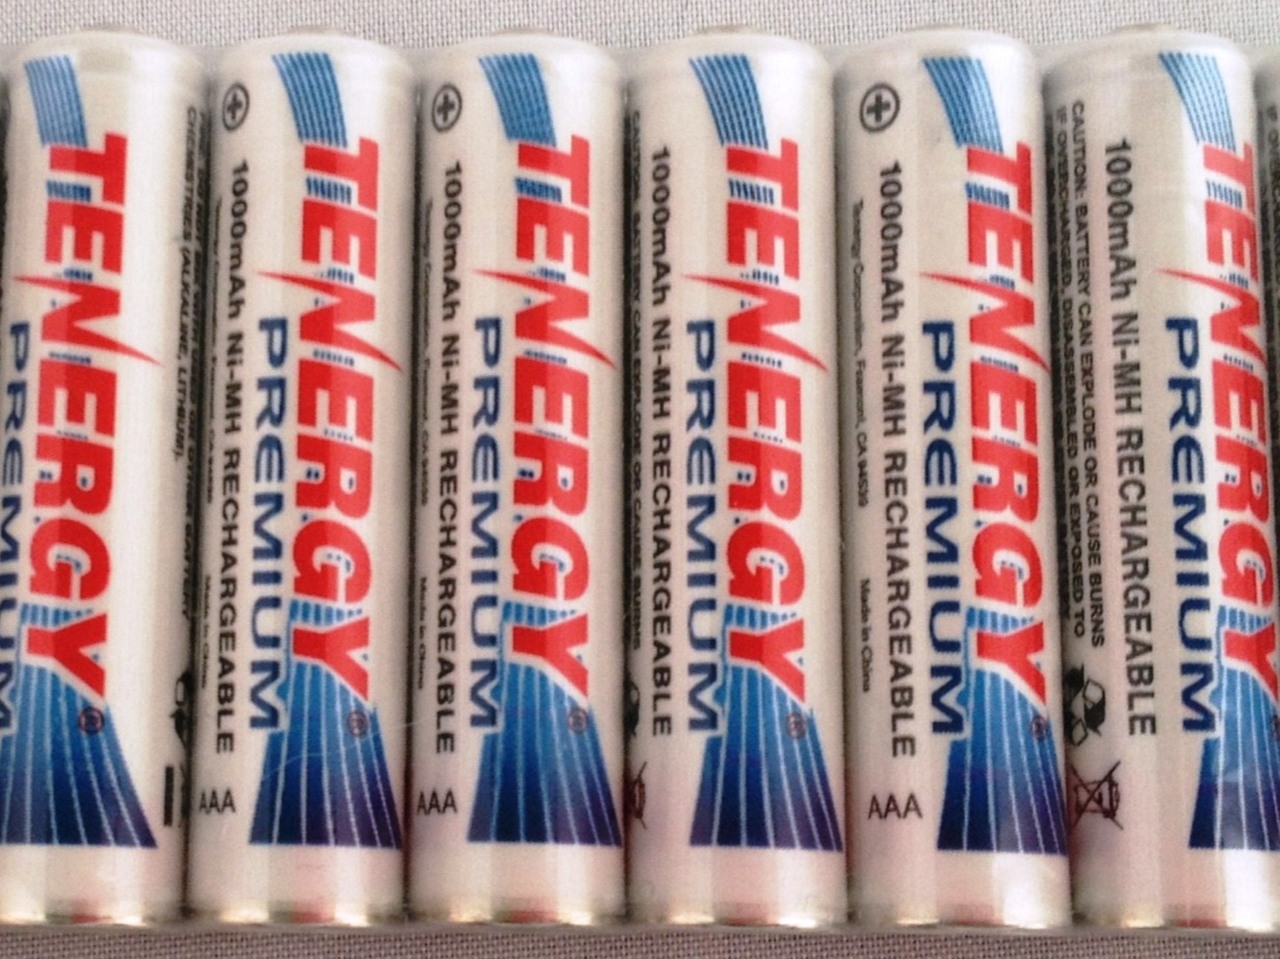 Tenergy Premium AAA NiMH 1000 MAh 1.2 V Rechargeable Batteries - 6 Pack + FREE SHIPPING!